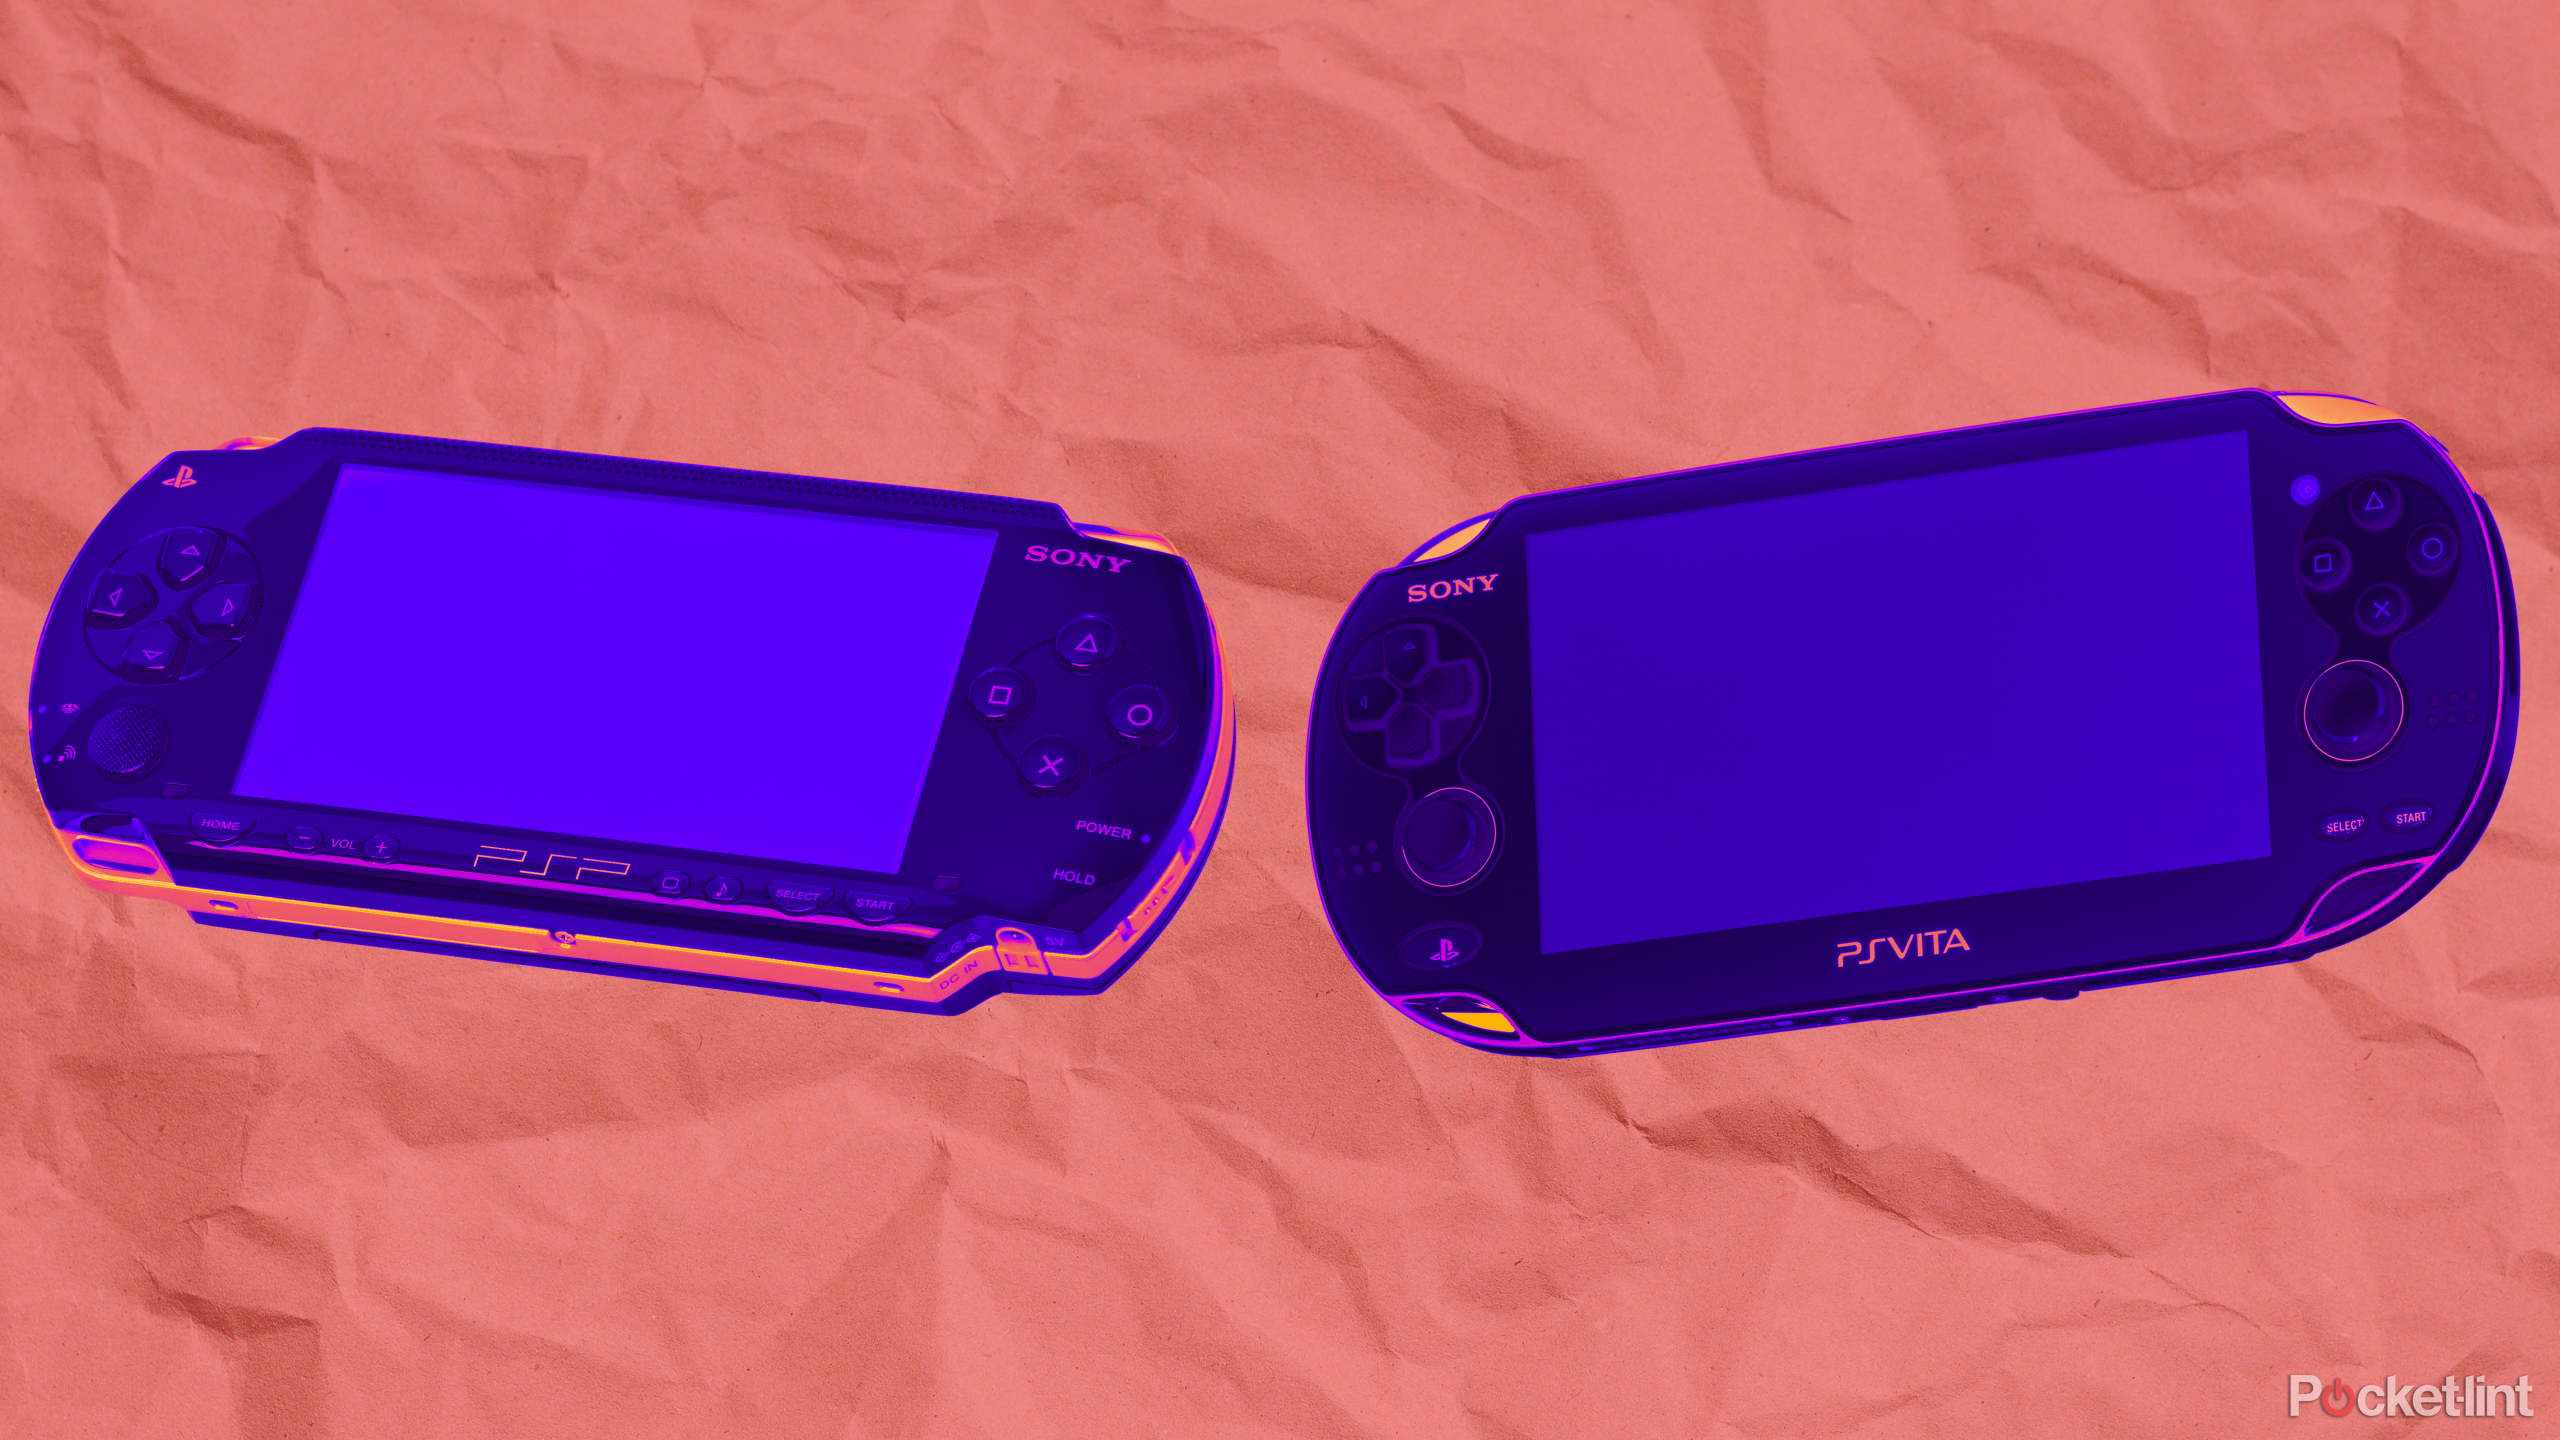 Why Sony needs to make a new handheld PlayStation